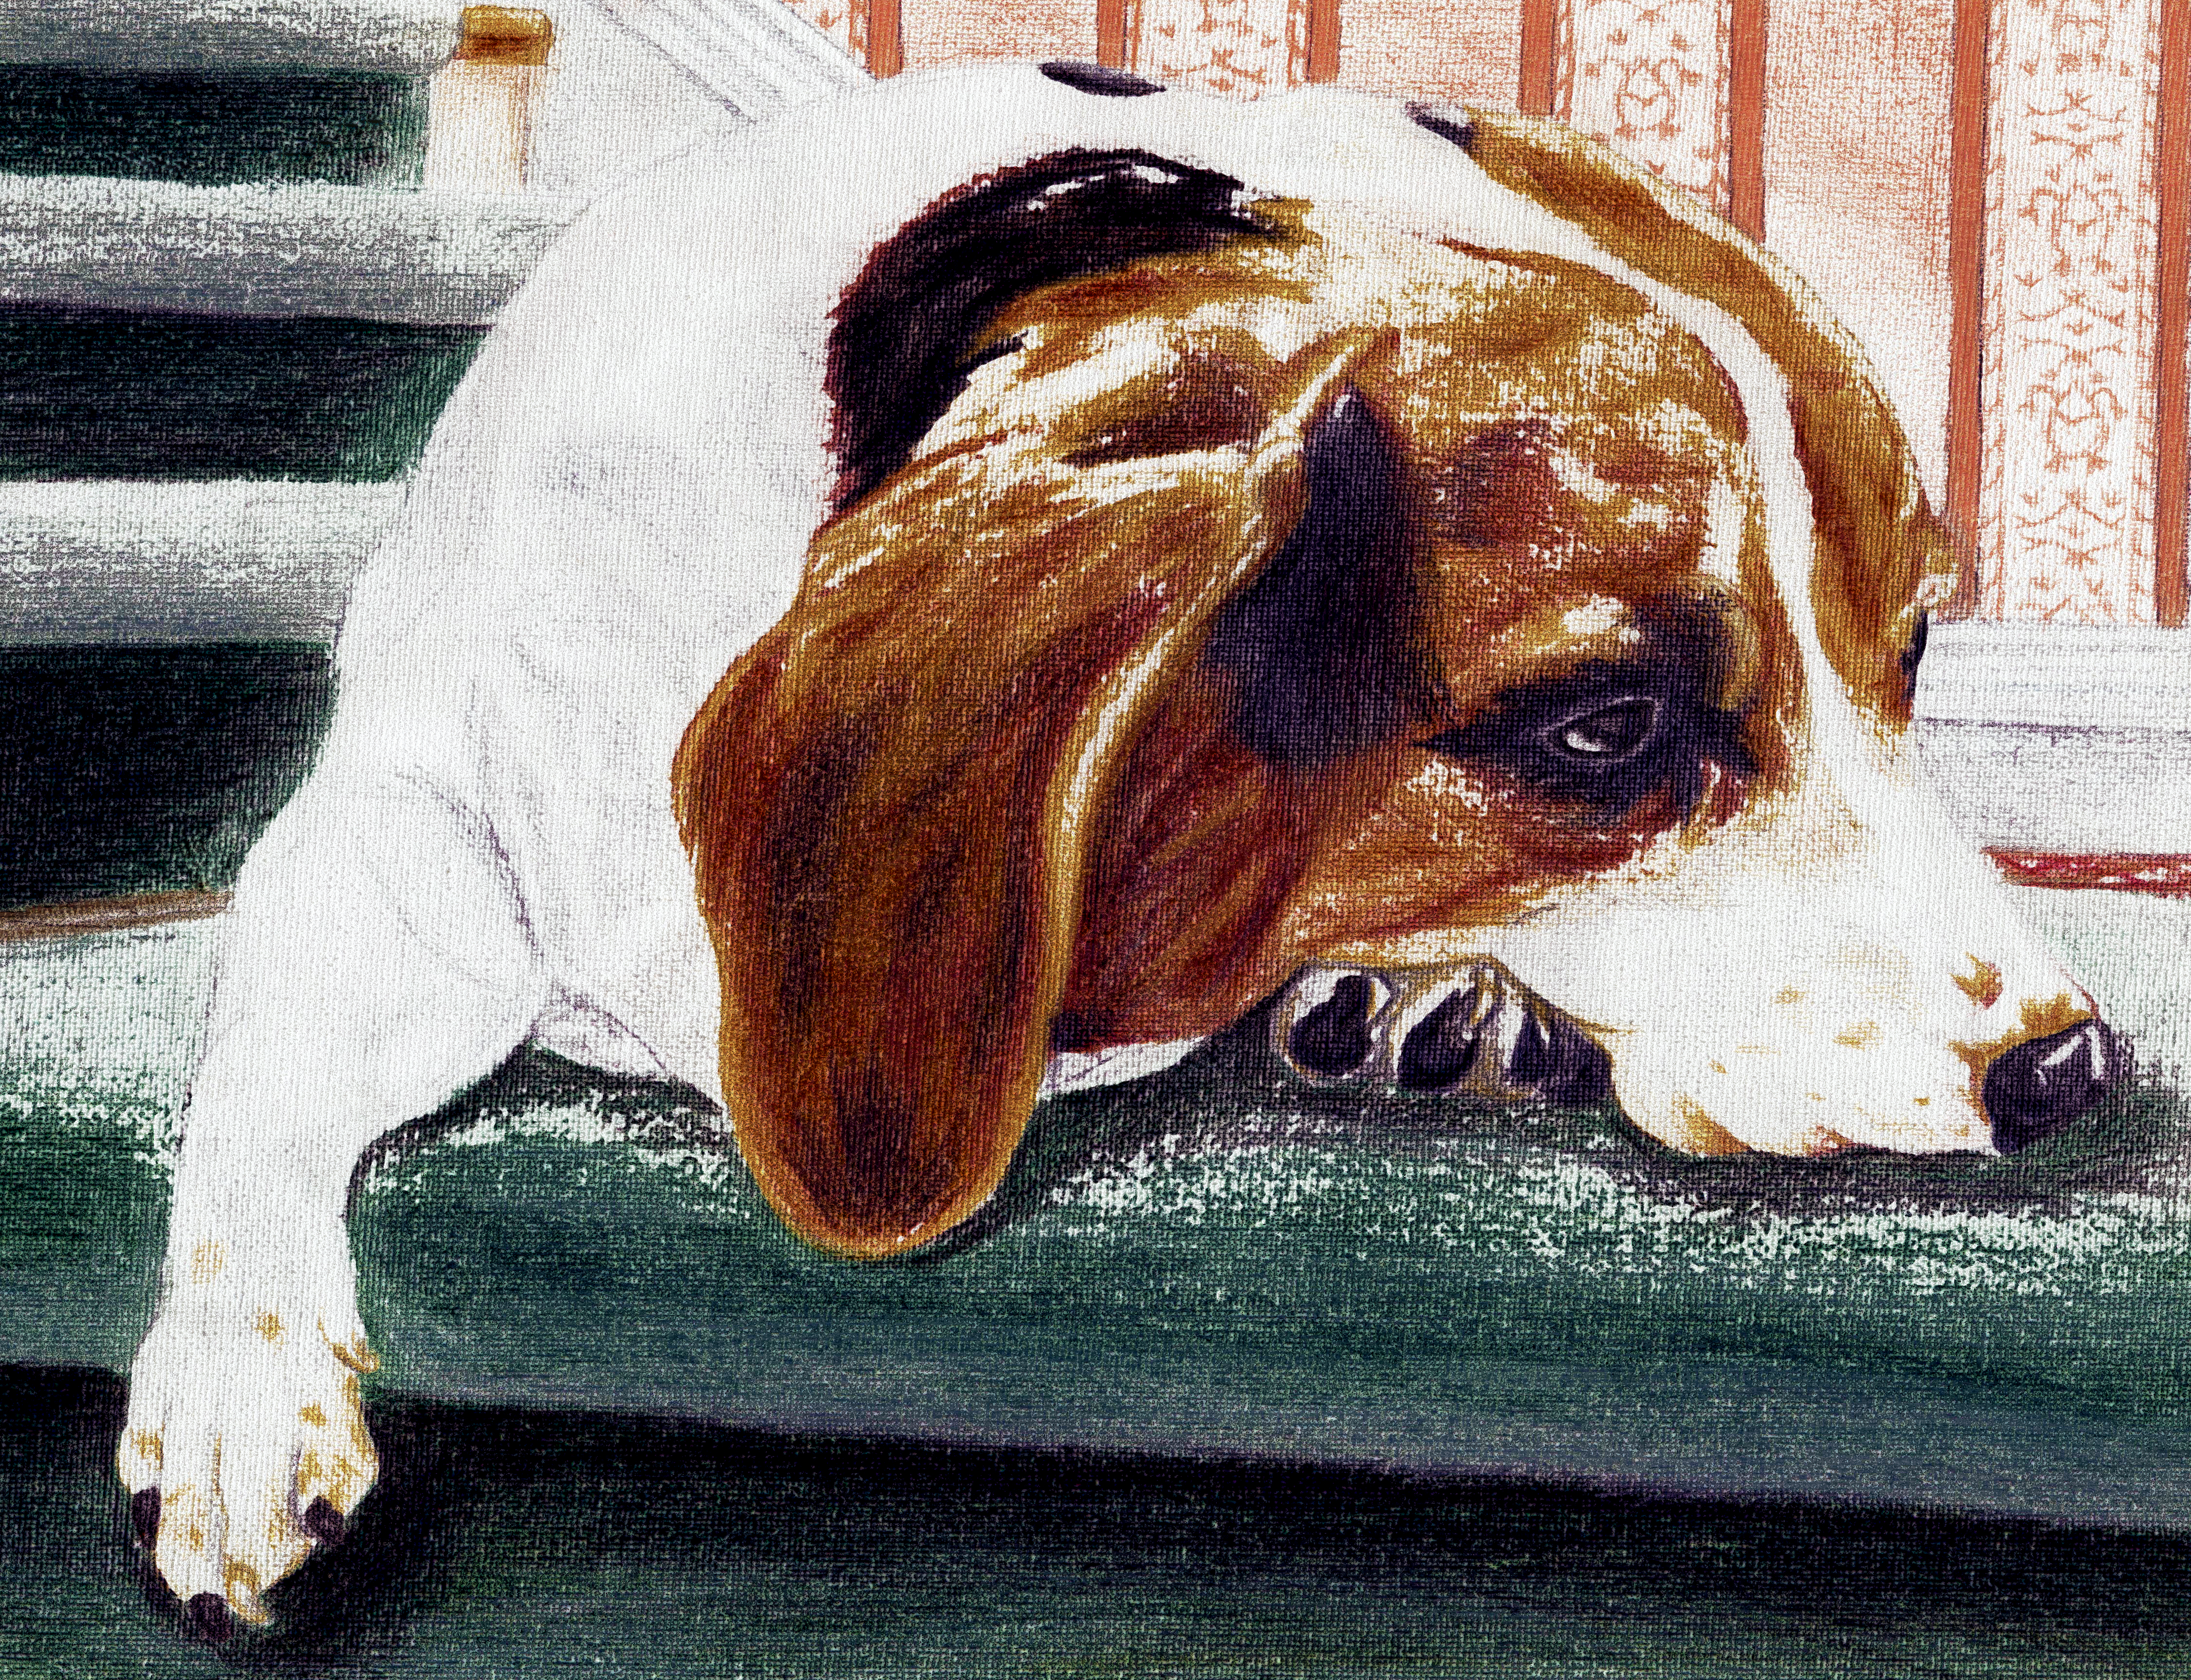 Colored pencil drawing of my beagle, Laika.